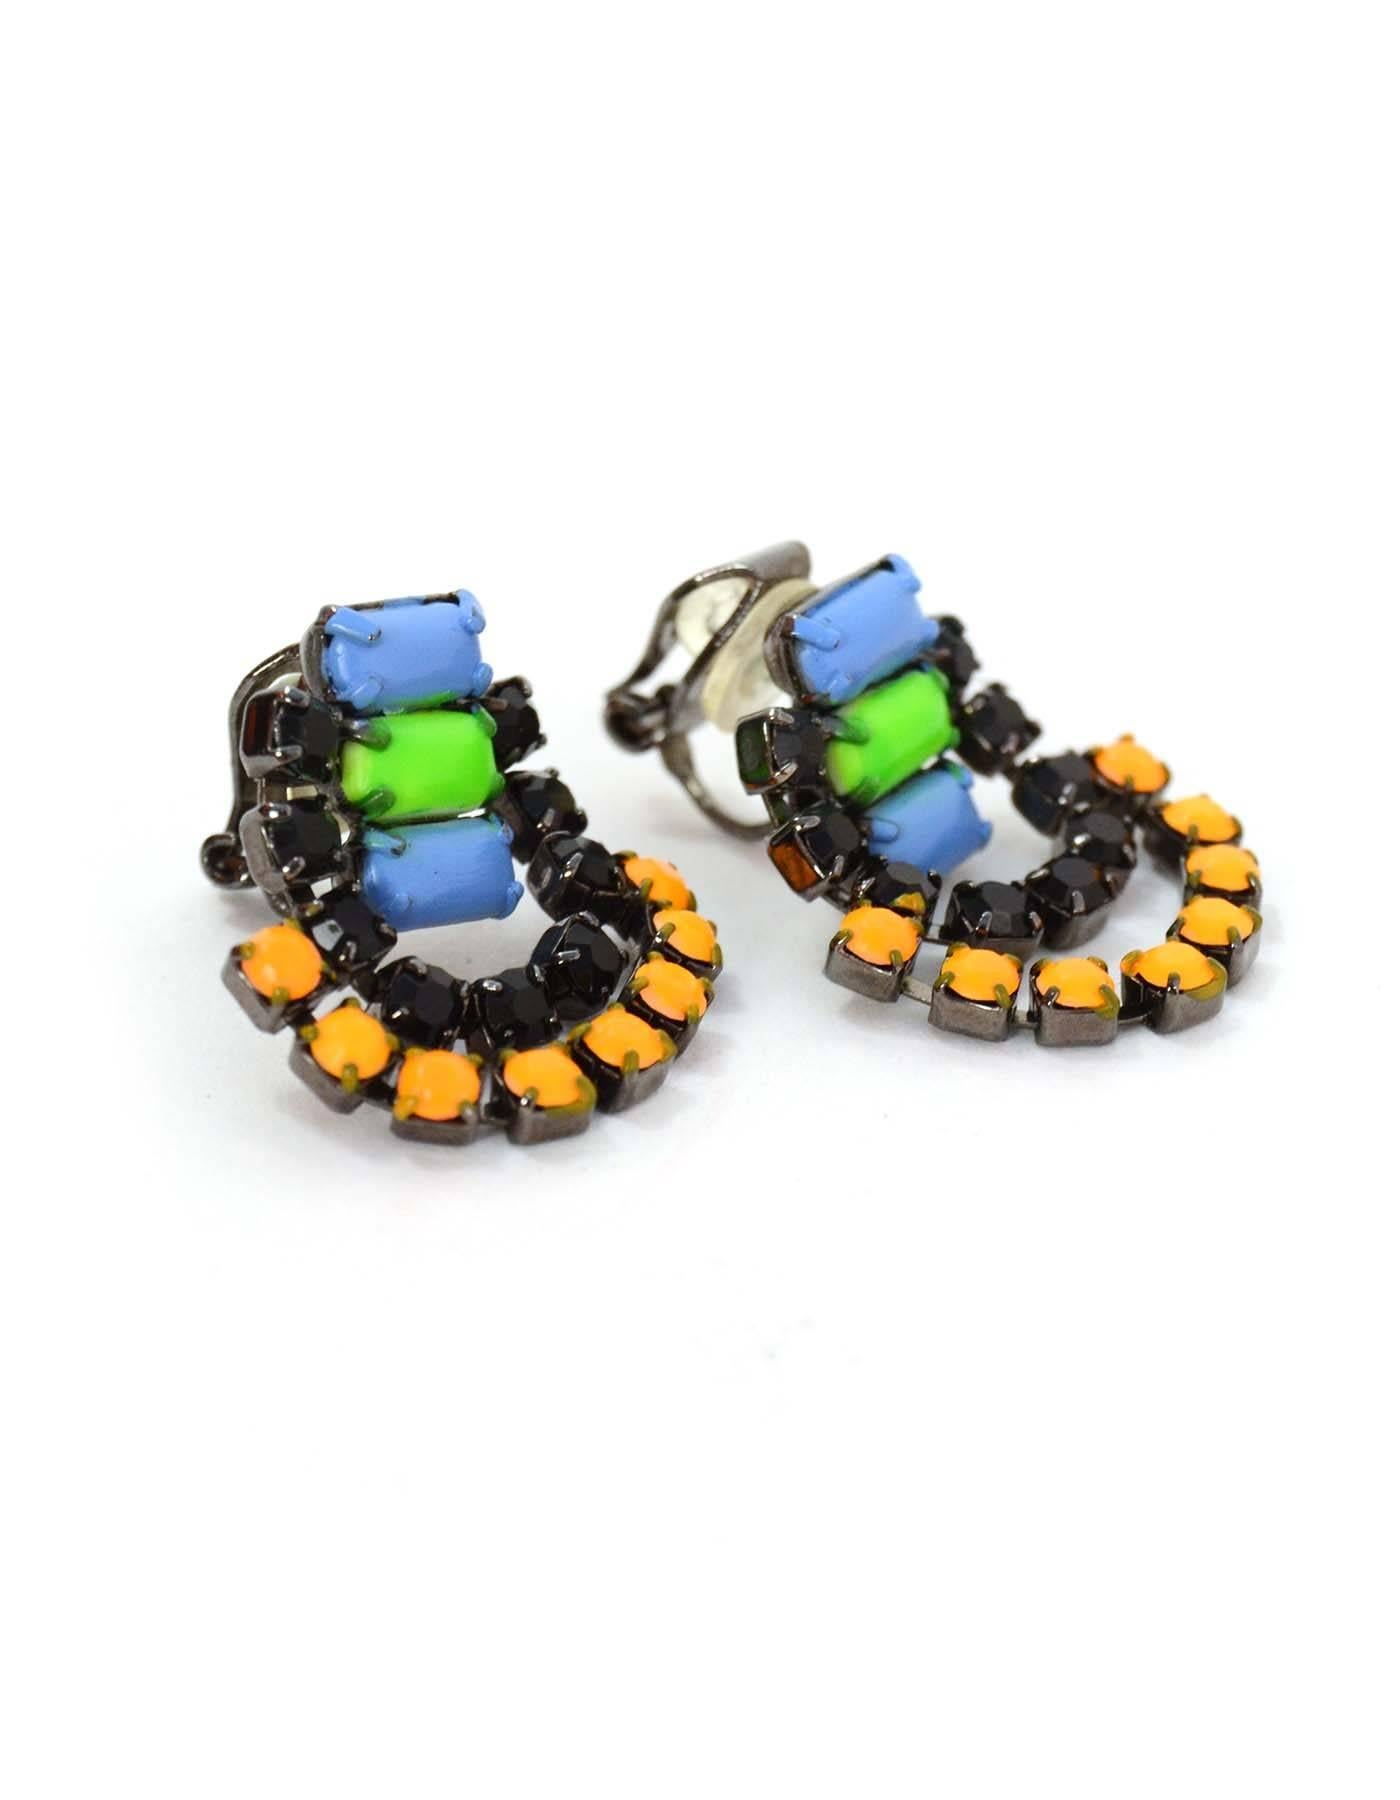 Tom Binns Multi-Colored Chandelier Clip On Earrings
Features hand-painted center section (blue and green)
Made In: U.S.A
Color: Black, neon orange, blue, green, and gunmetal
Hardware: Gunmetal
Materials: Metal and crystal
Closure: Clip